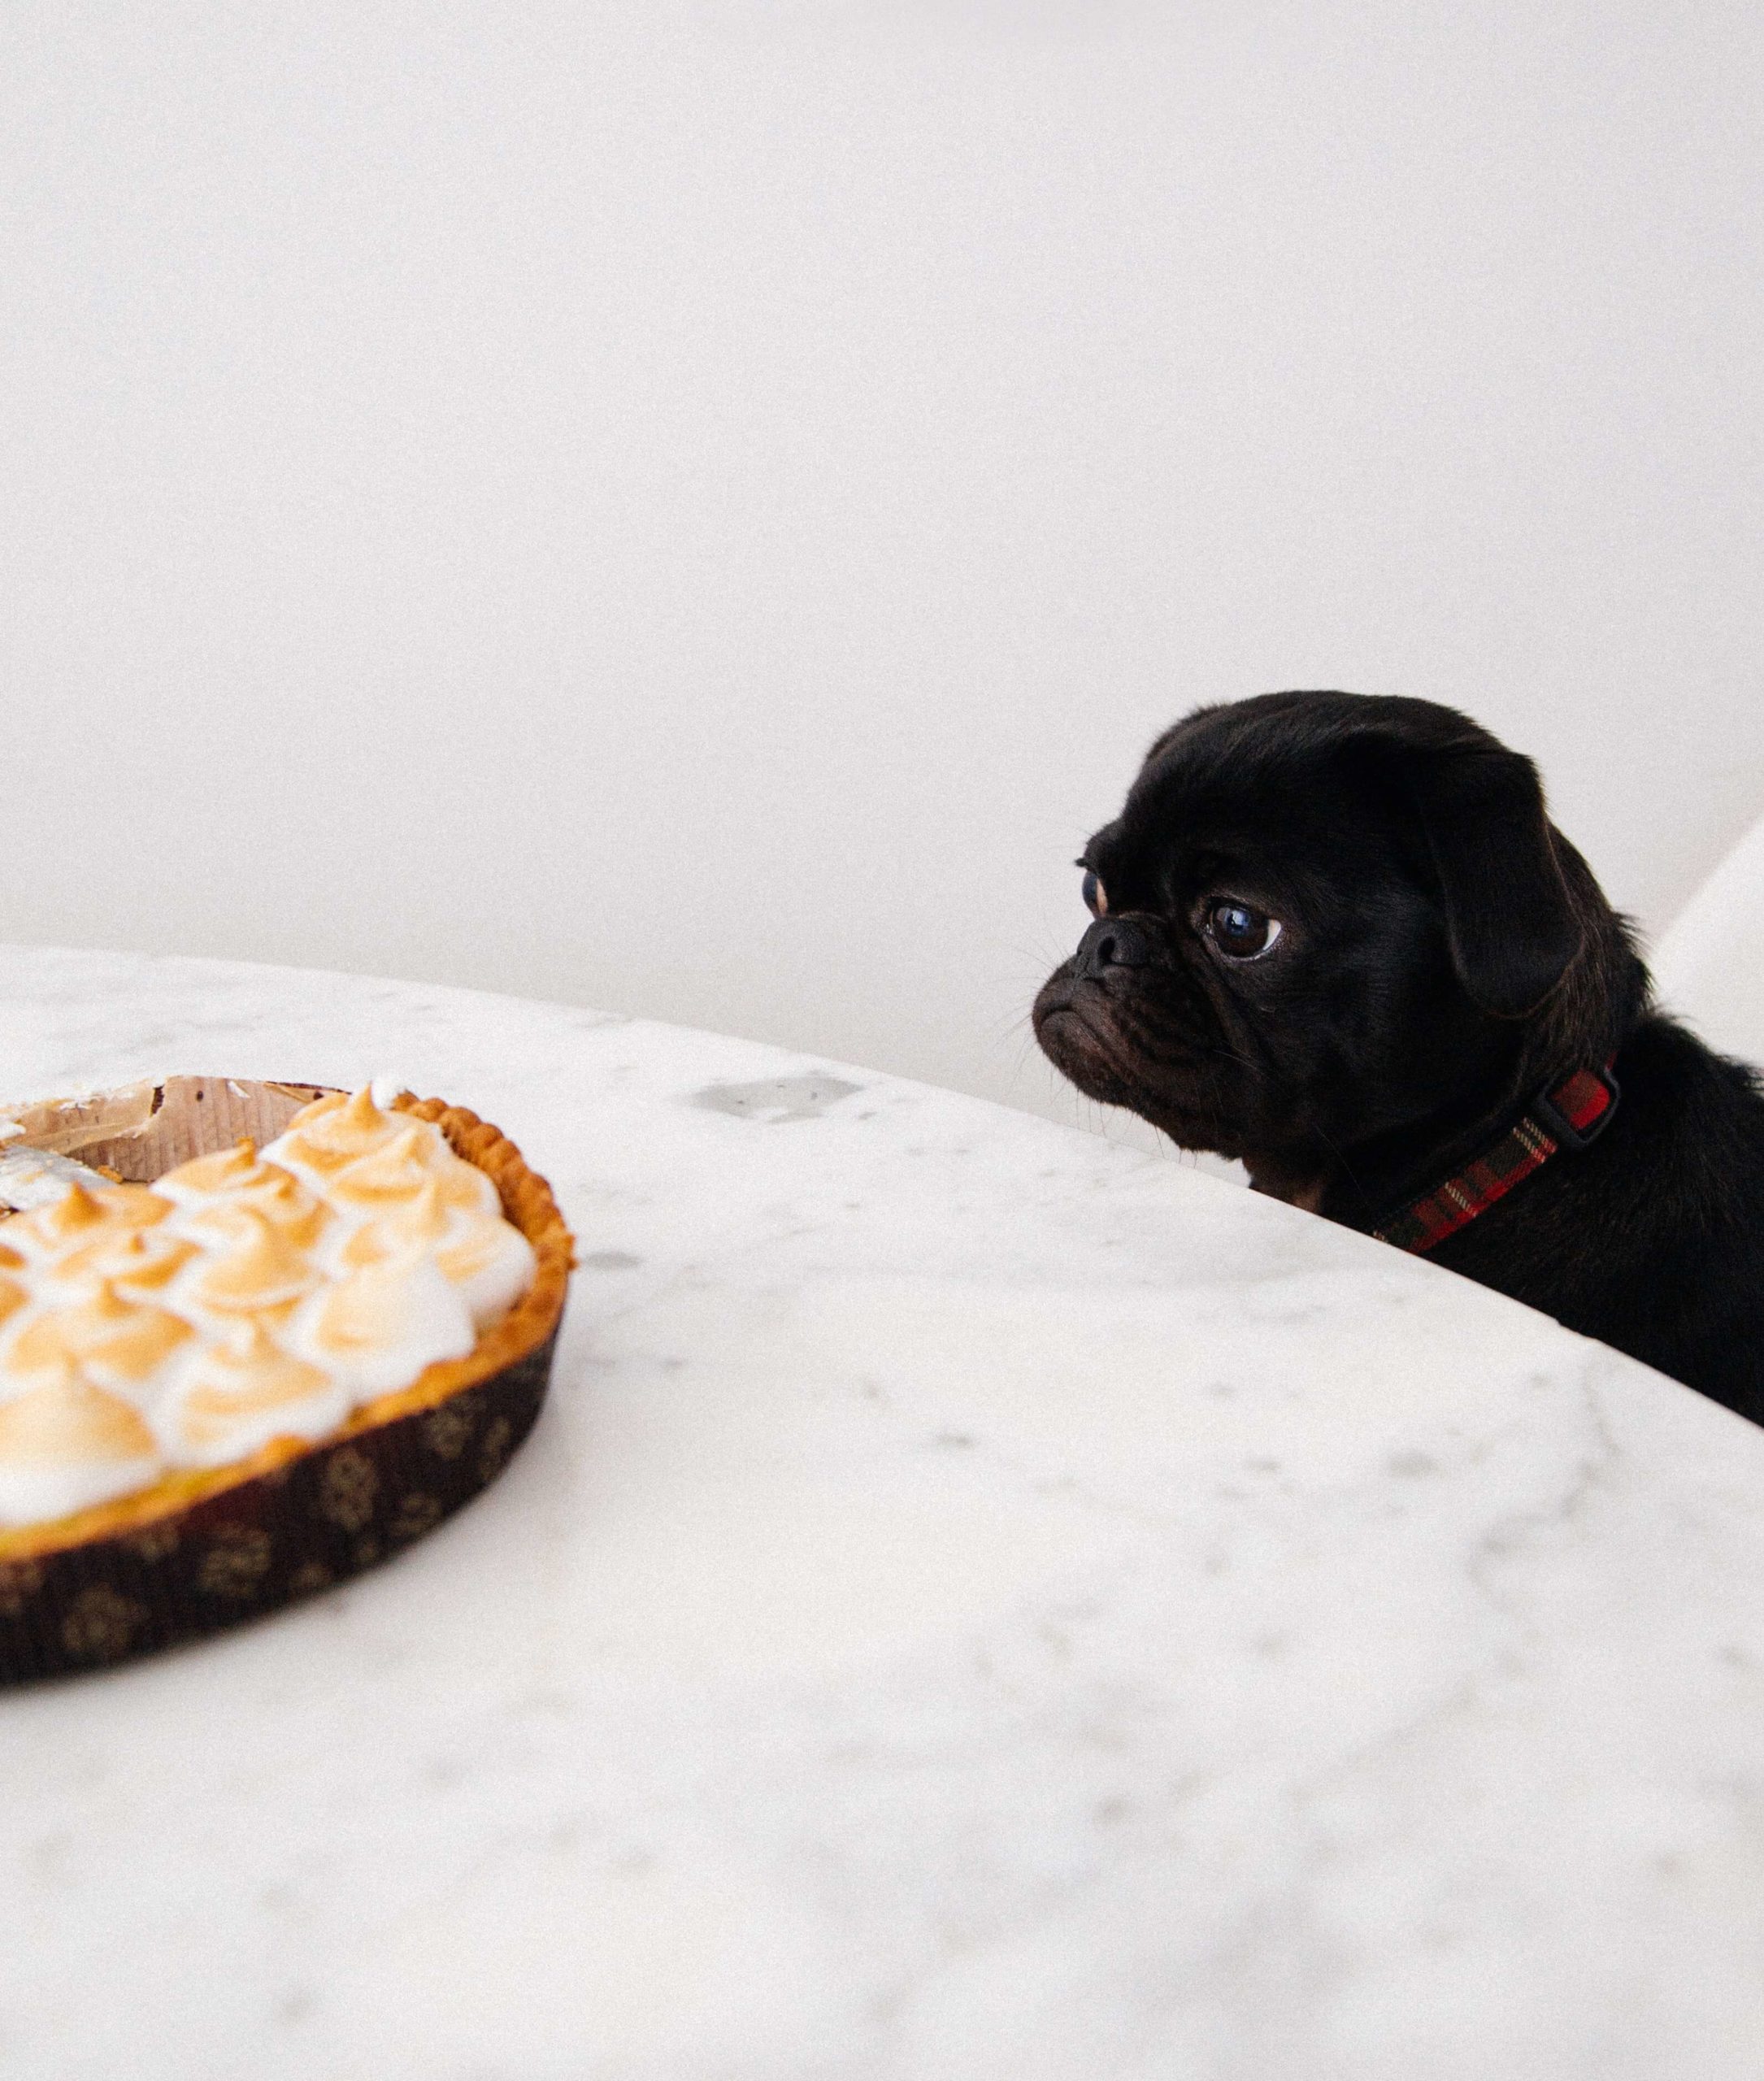 Dogs and Chocolate: What to Do If My Dog Eats Chocolate